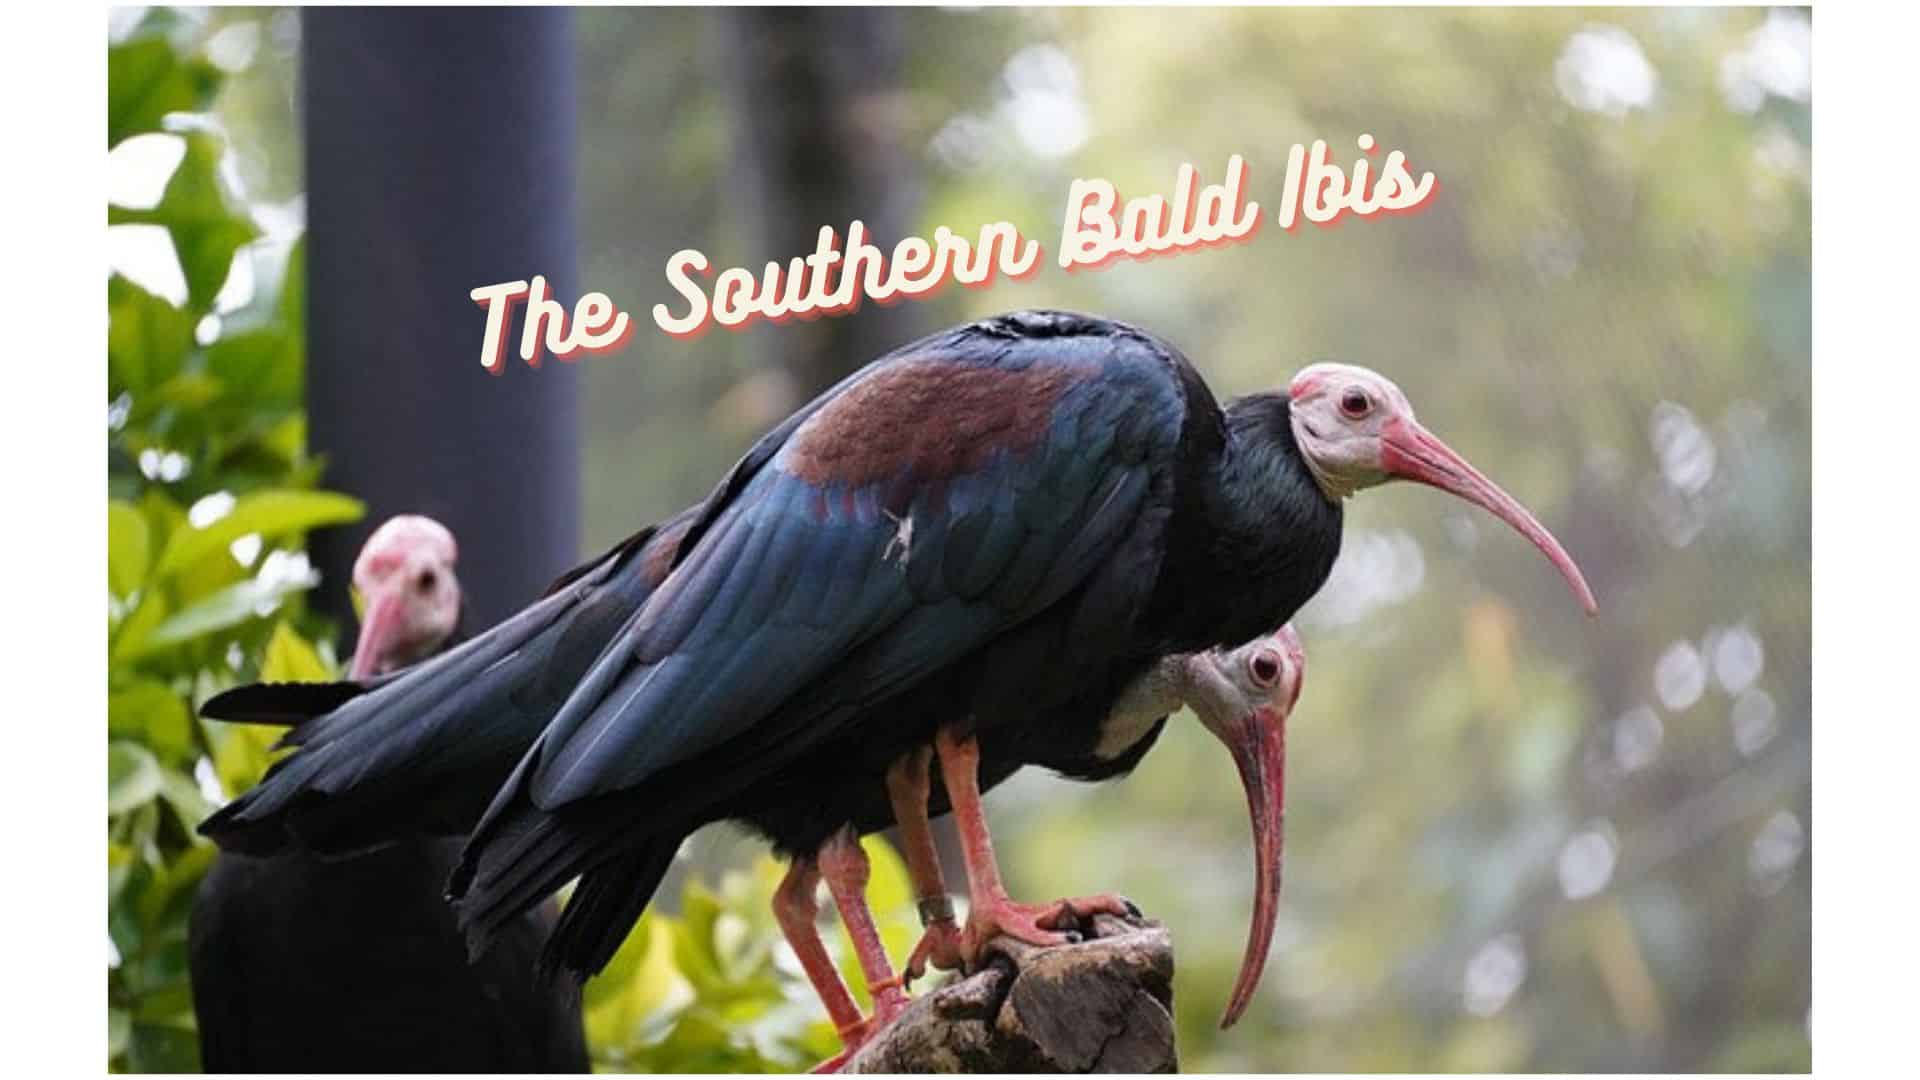 The Southern Bald Ibis